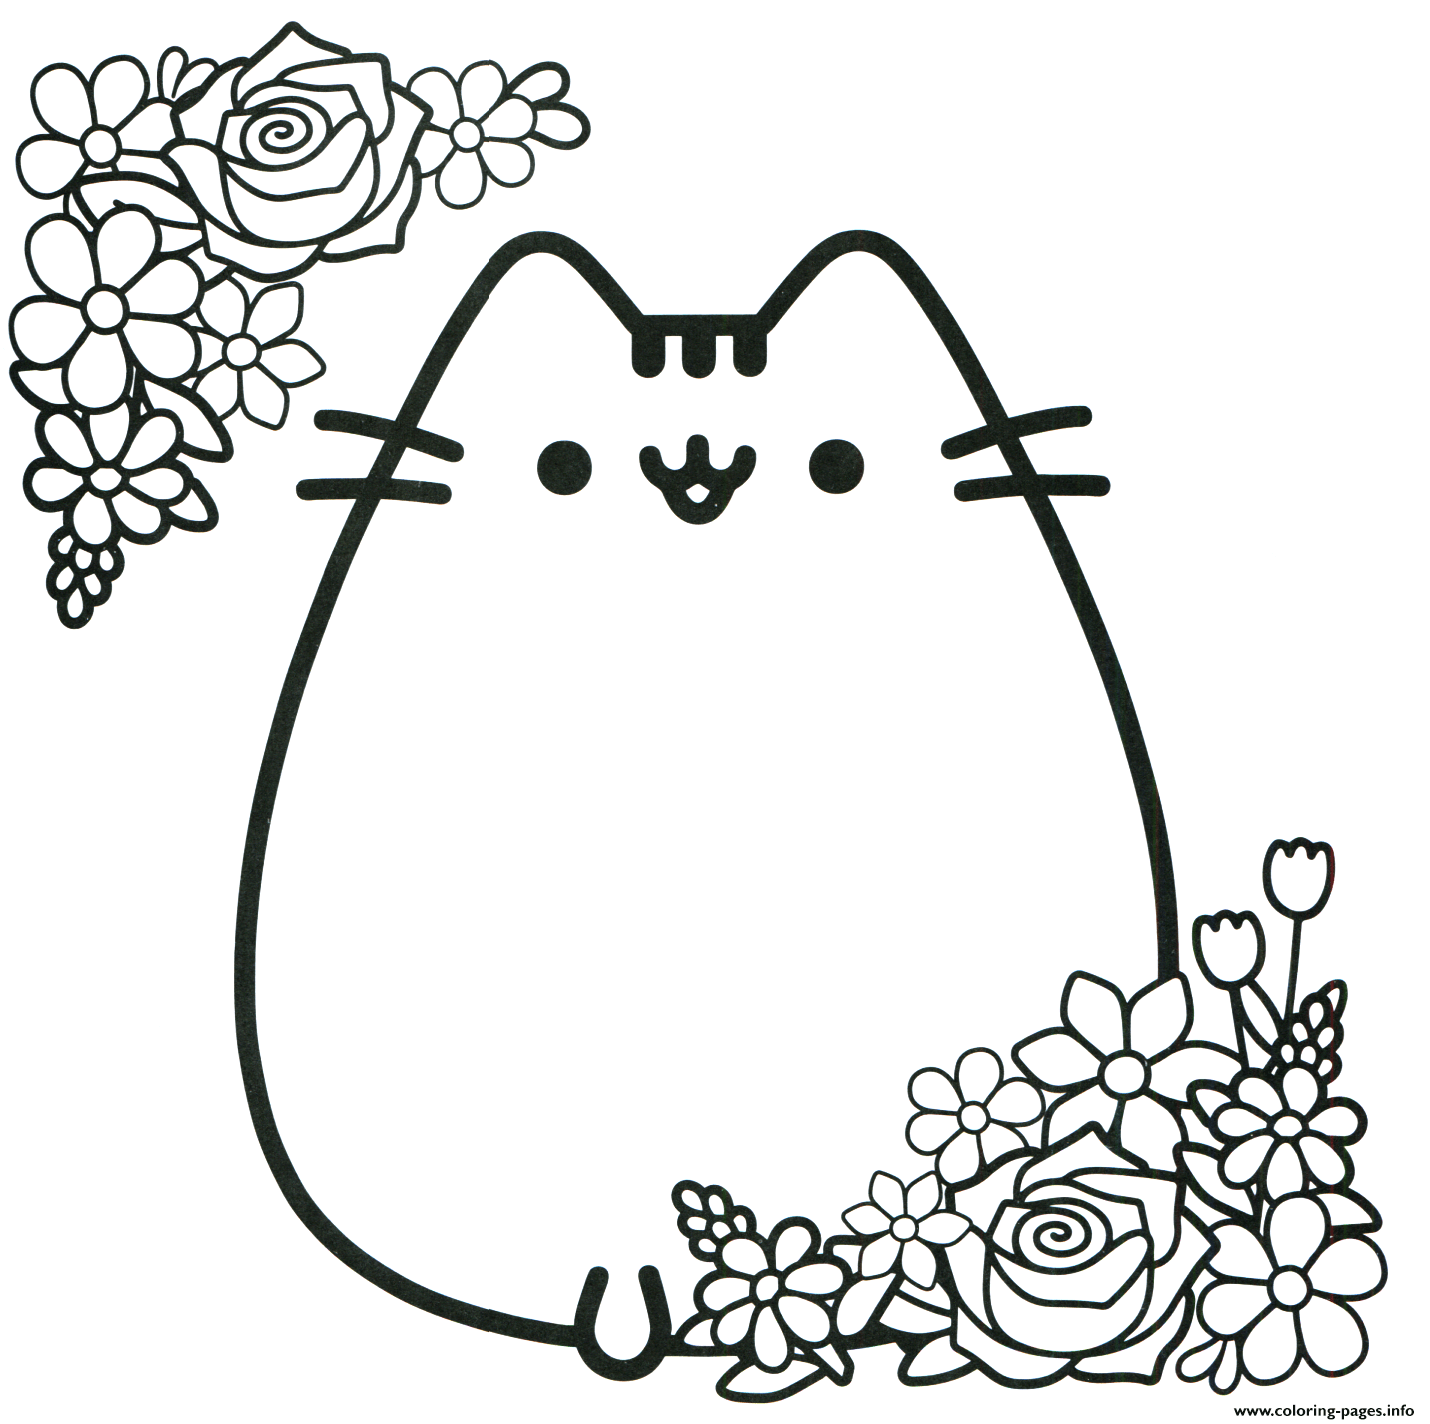 Remarquable Coloriage Pusheen Pdf Photo